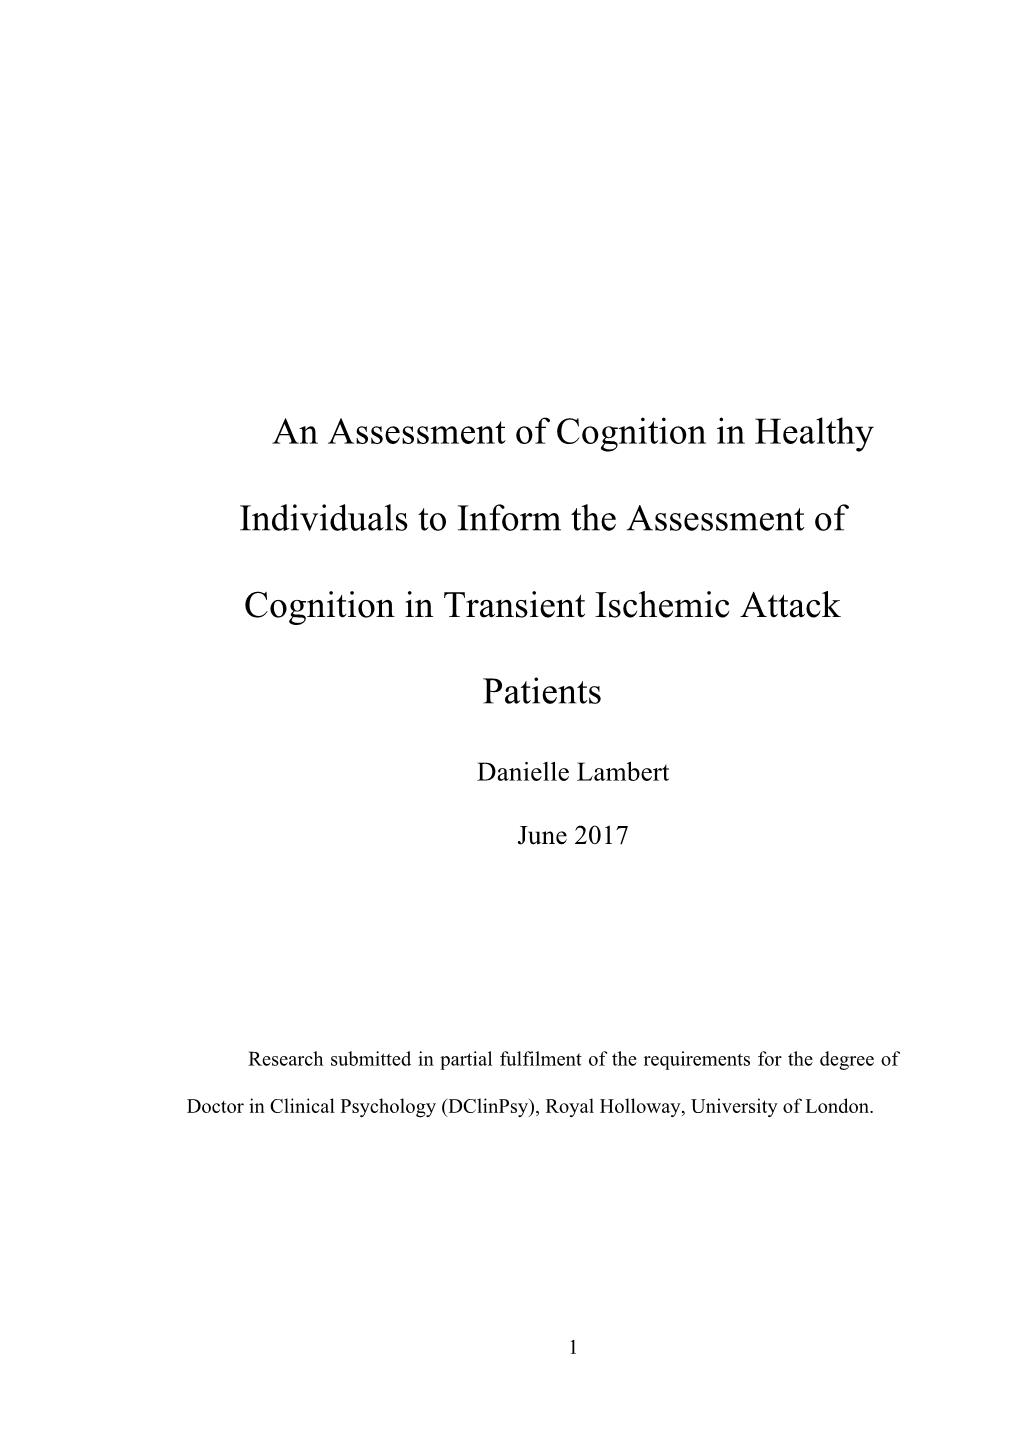 An Assessment of Cognition in Healthy Individuals to Inform The